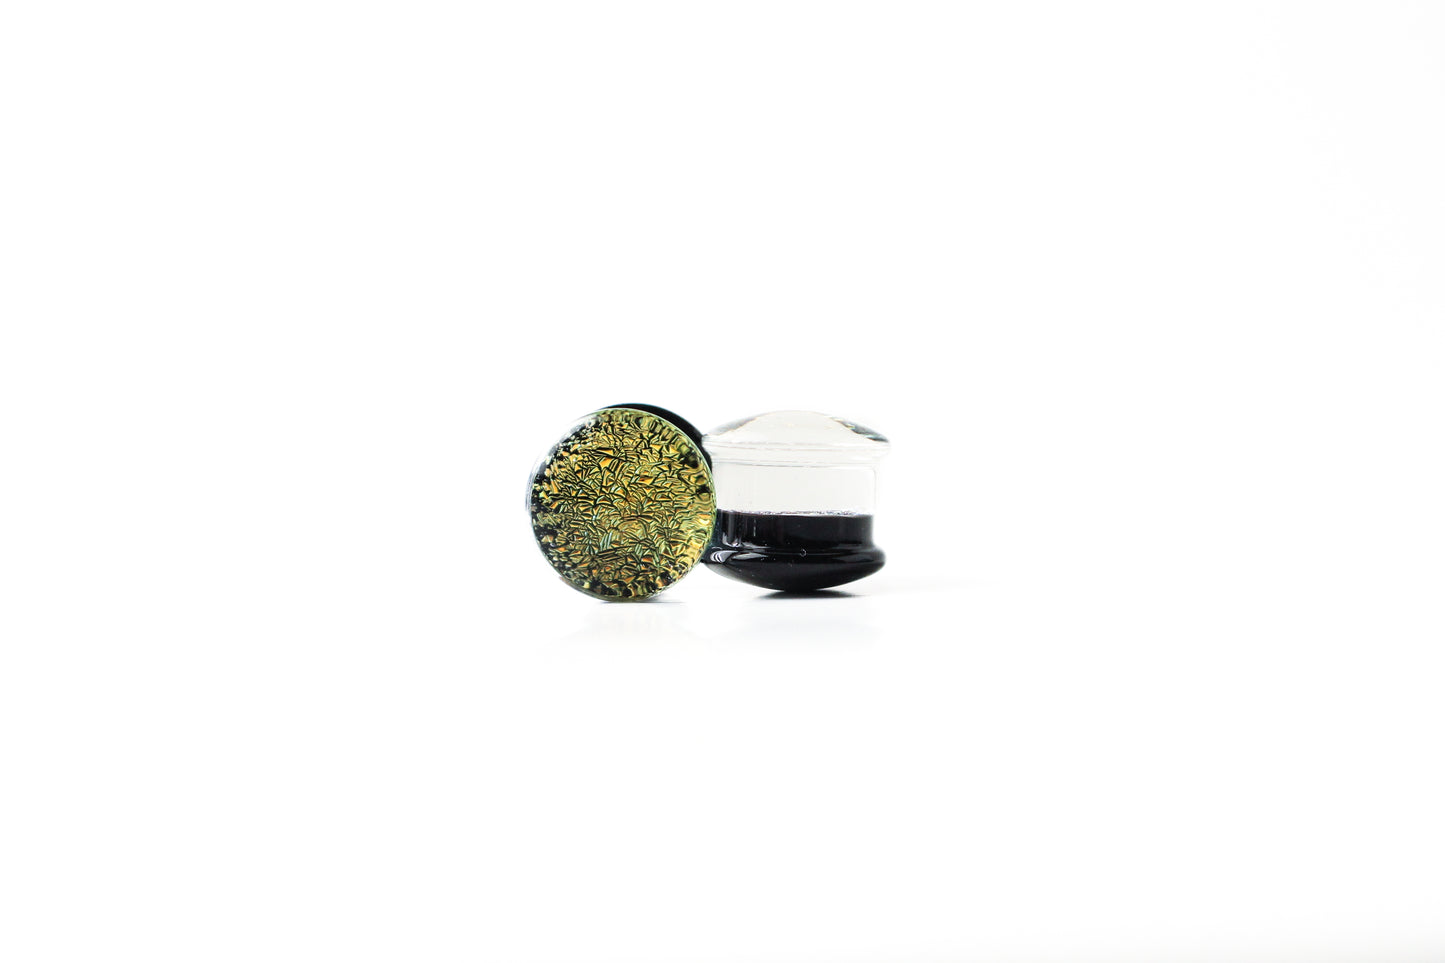 9/16" (14mm) - Gorilla Glass - Dichroic Double Flare Plugs - Gold